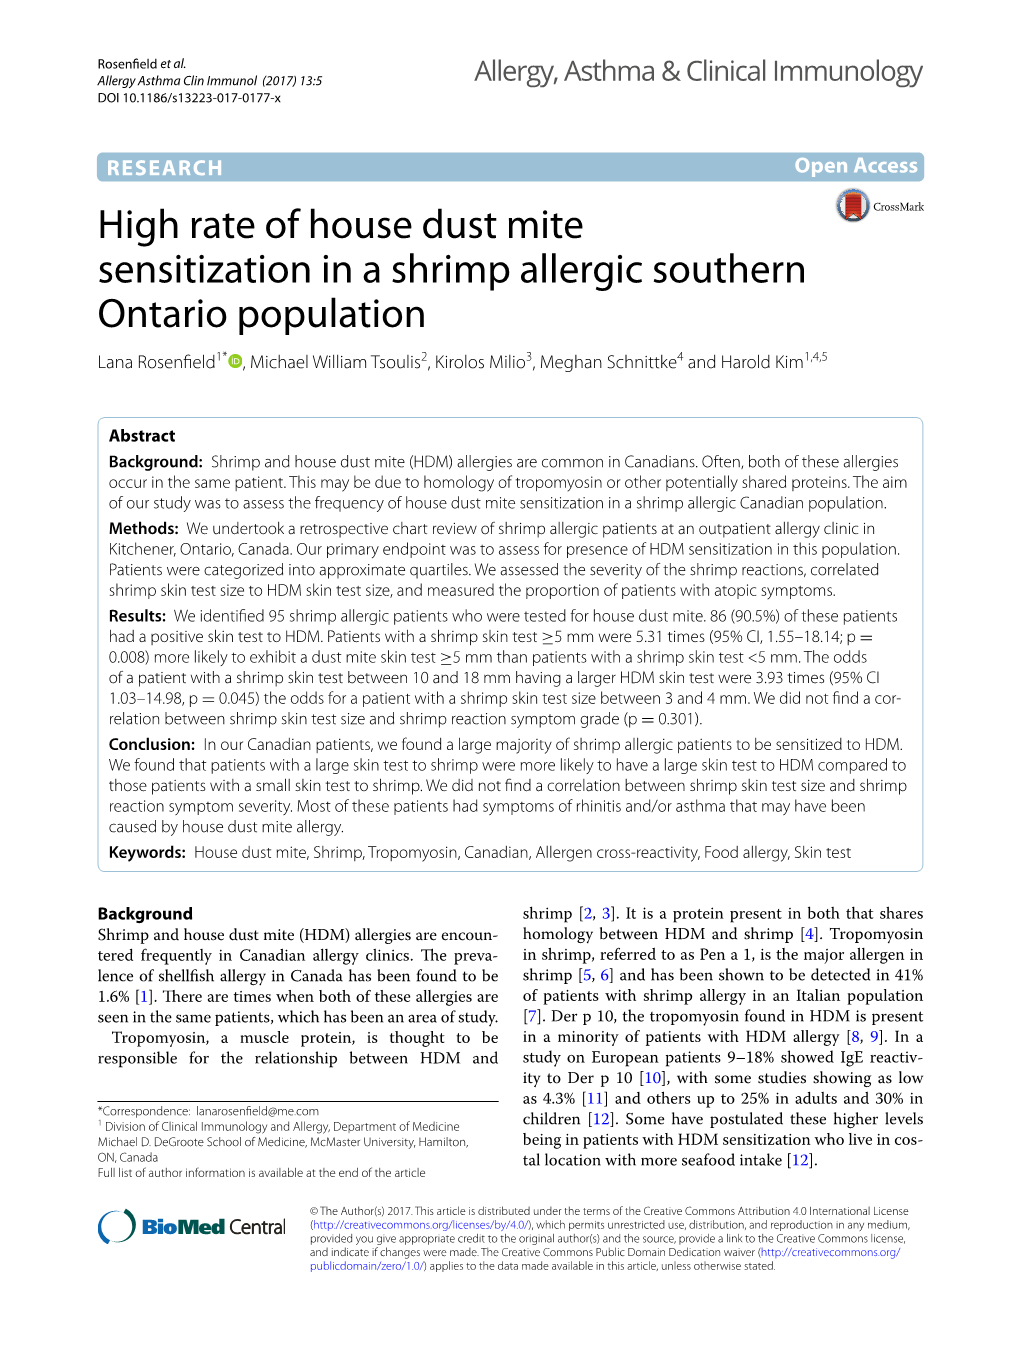 High Rate of House Dust Mite Sensitization in a Shrimp Allergic